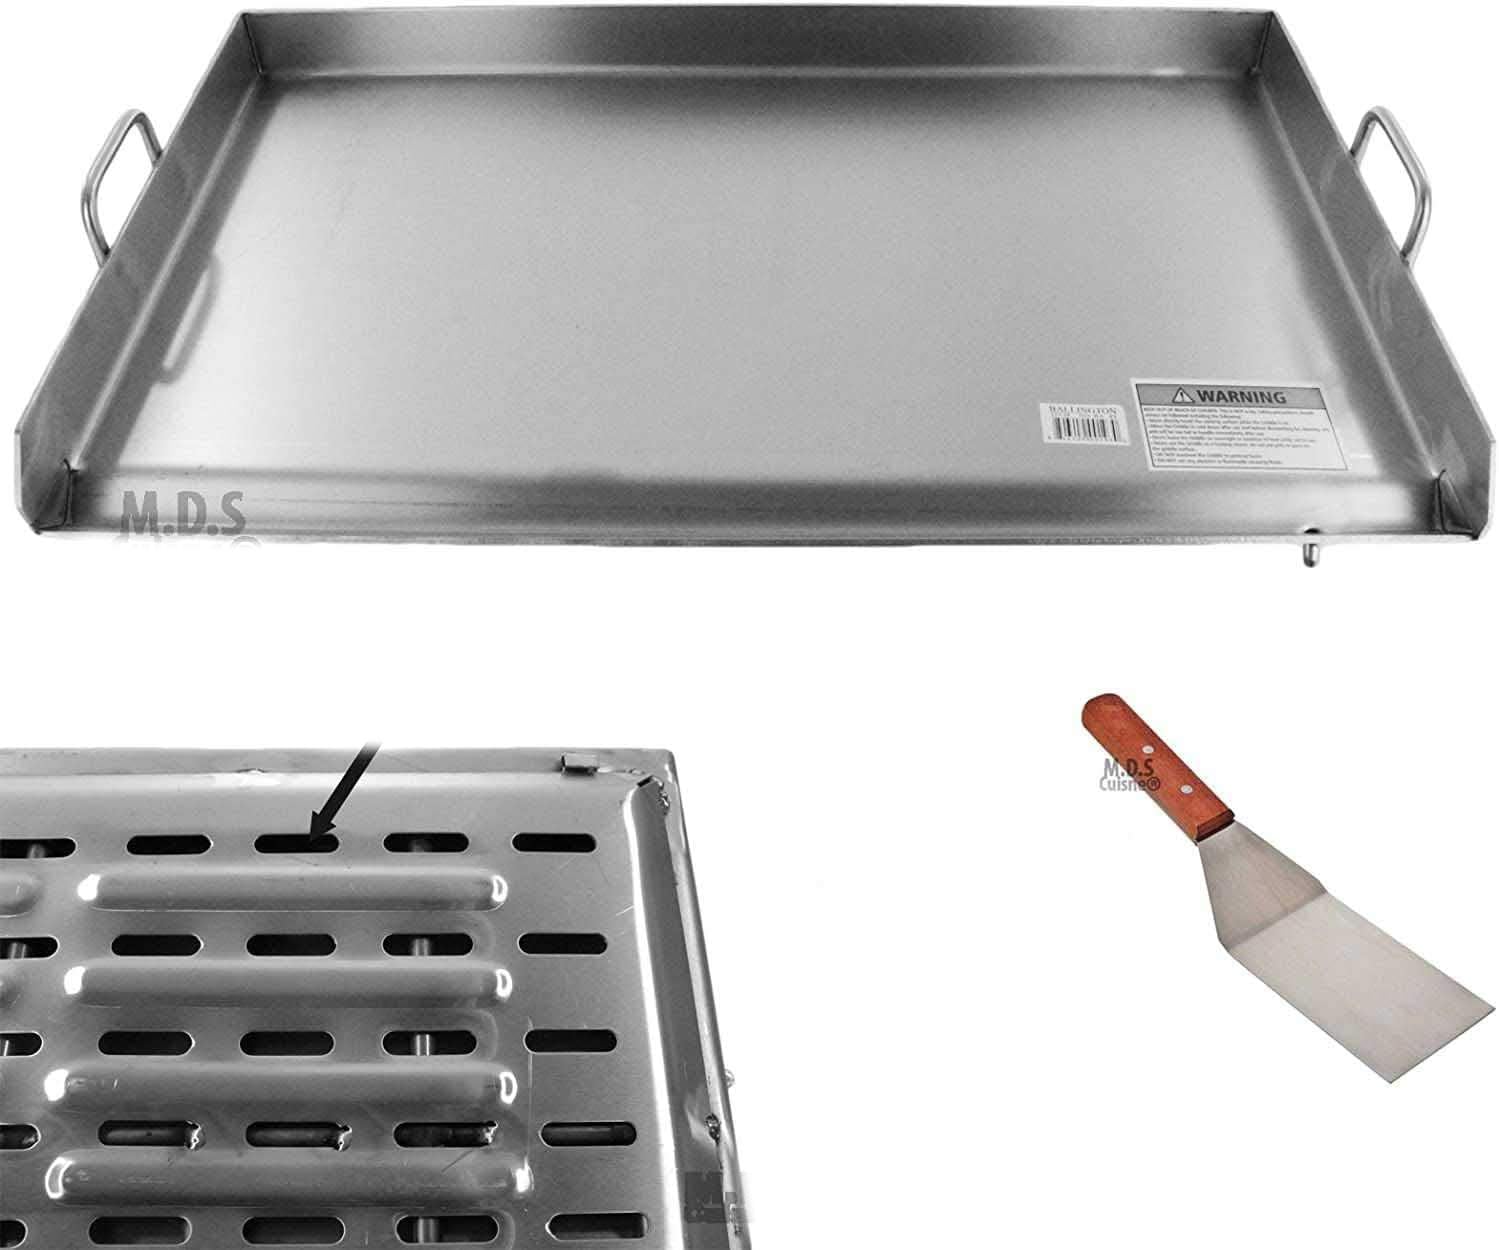 M.D.S Cuisine Cookwares Griddle Stainless Steel Flat [...]